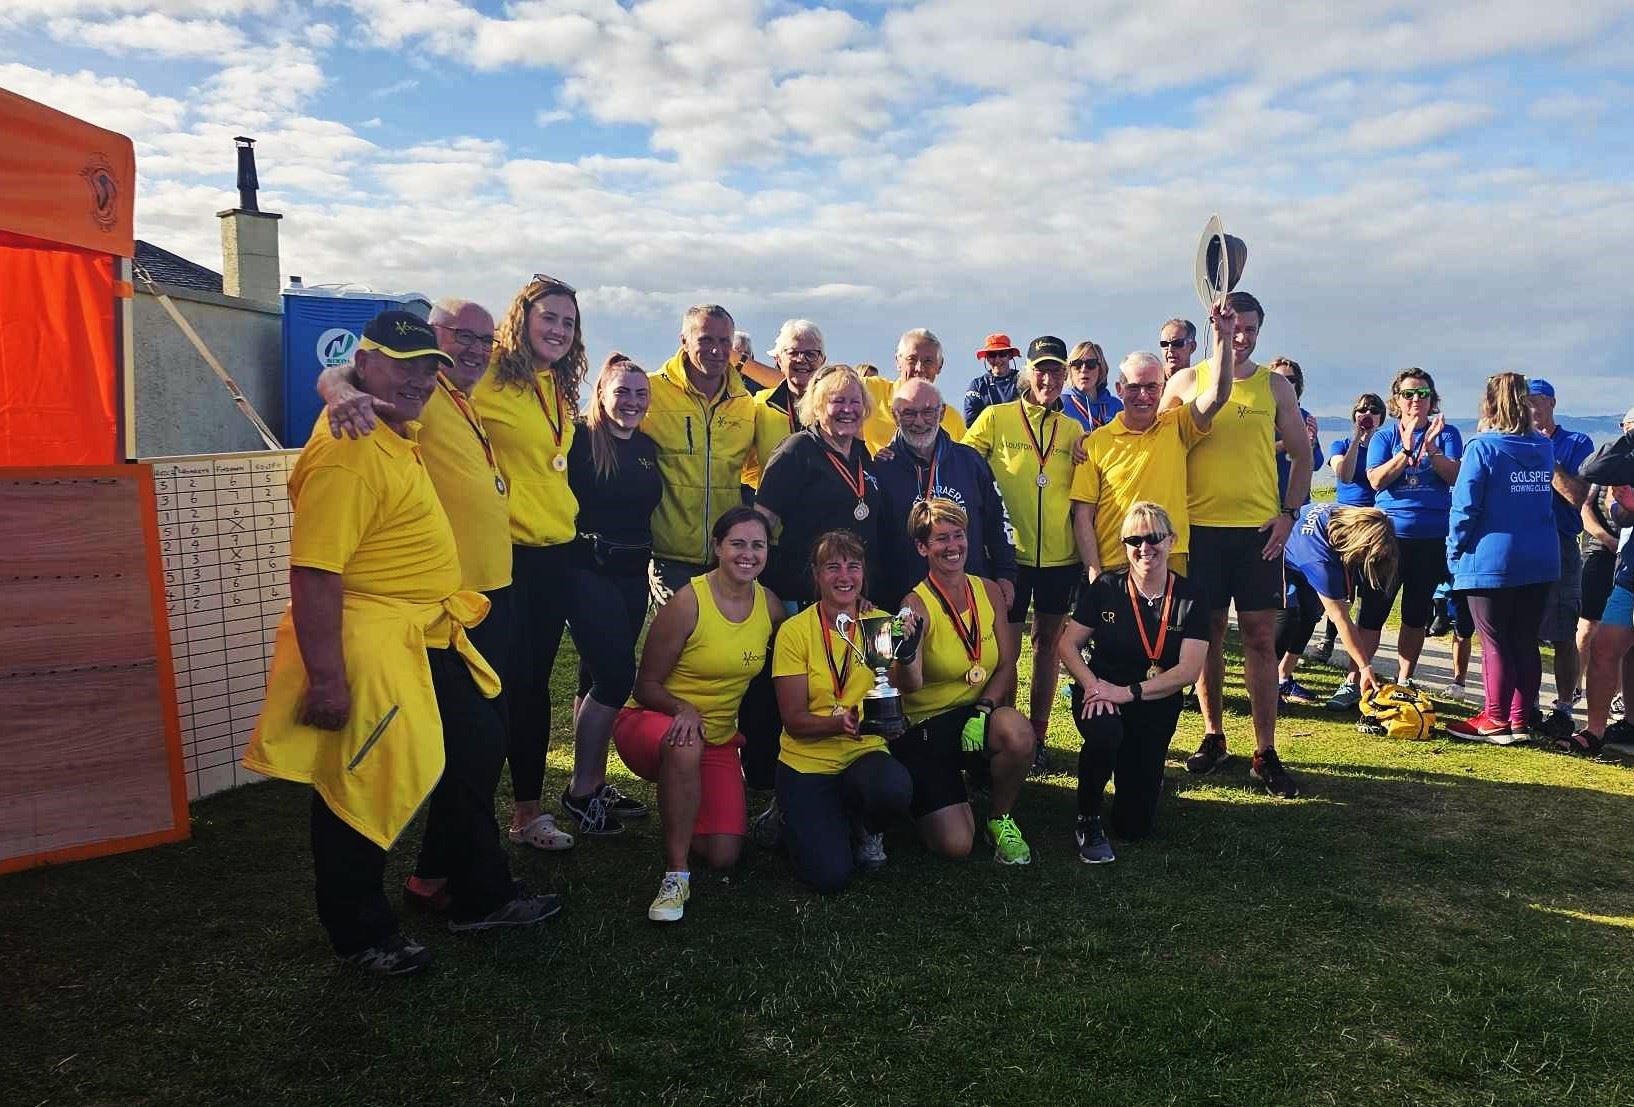 The Avoch Rowing Club team was presented with the Strathnairn cup after winning the first Nairn Regatta.